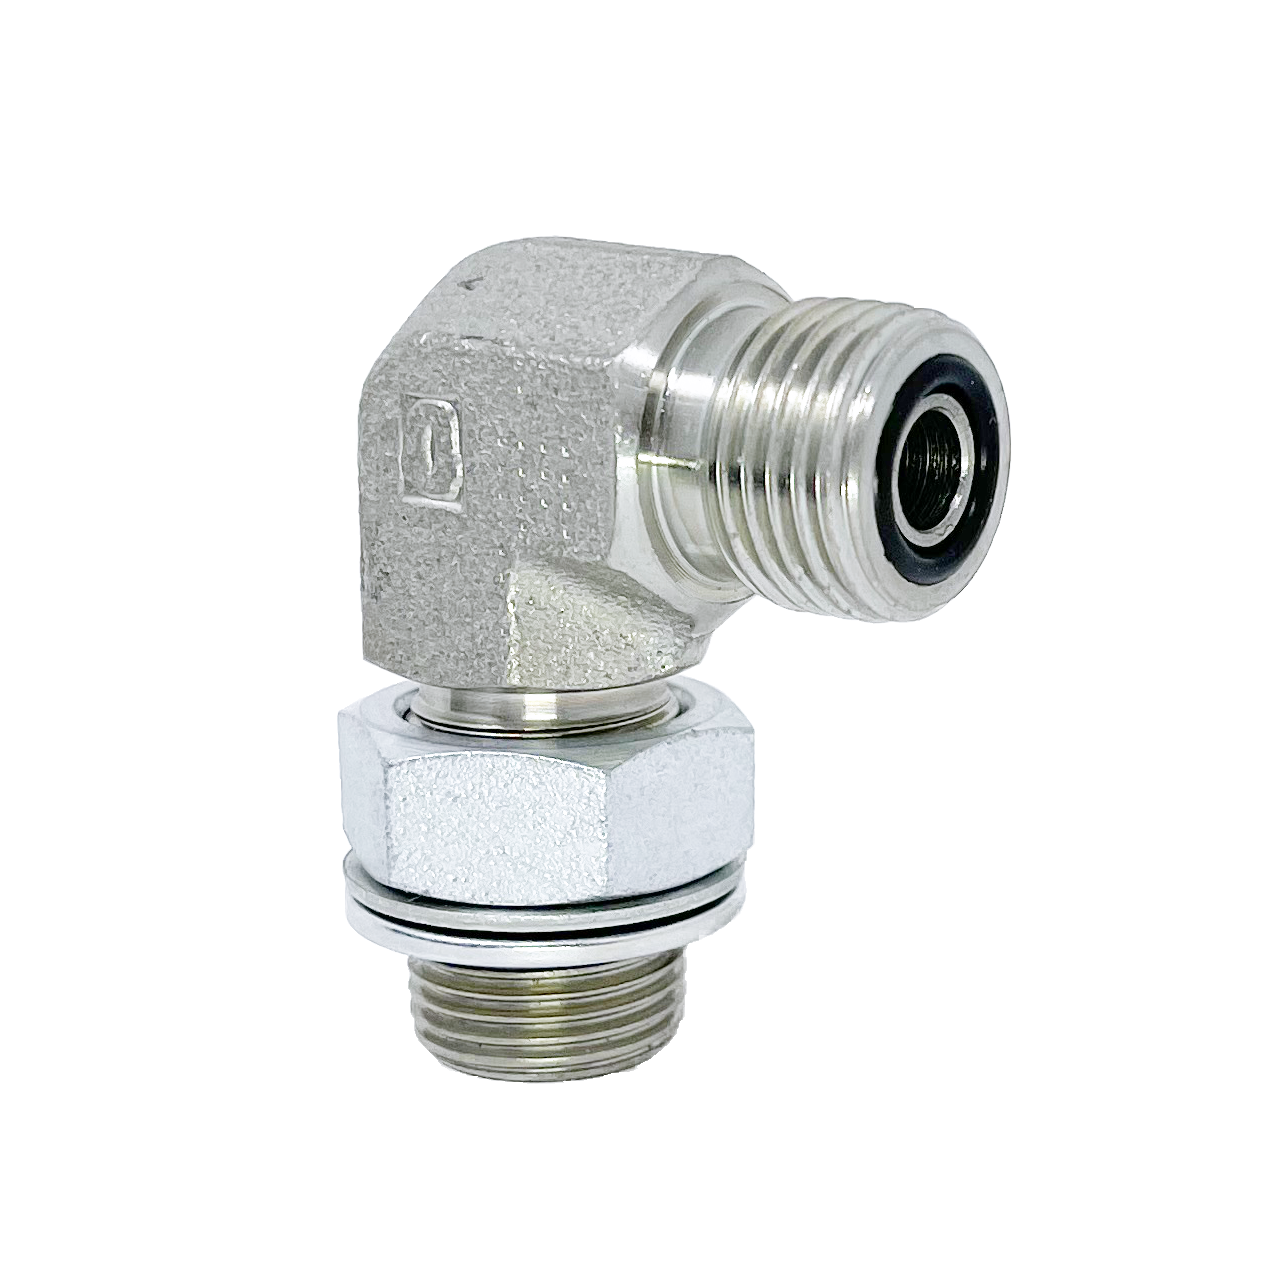 6059-20-20 : Adaptall 90-Degree  Adapter, Male 1.25 (1-1/4") ORFS x Male 1.25 (1-1/4") BSPP, Carbon Steel